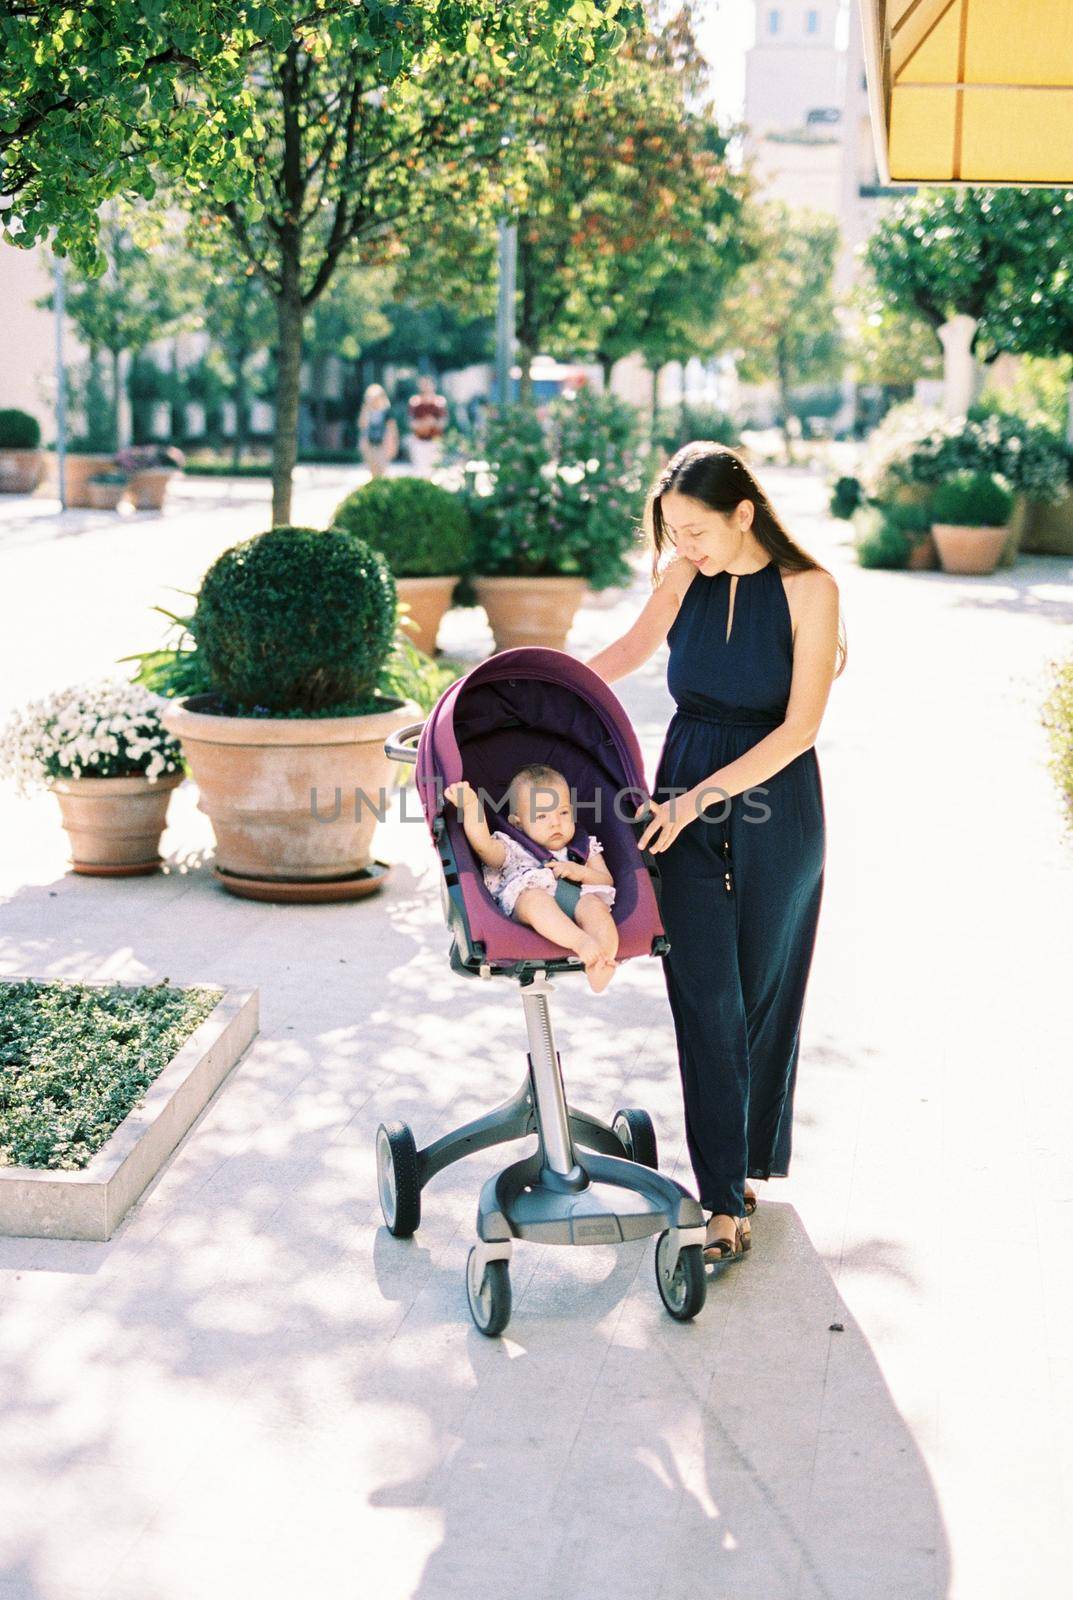 Mom stands near the stroller with the baby on the street near the flowerpots by Nadtochiy